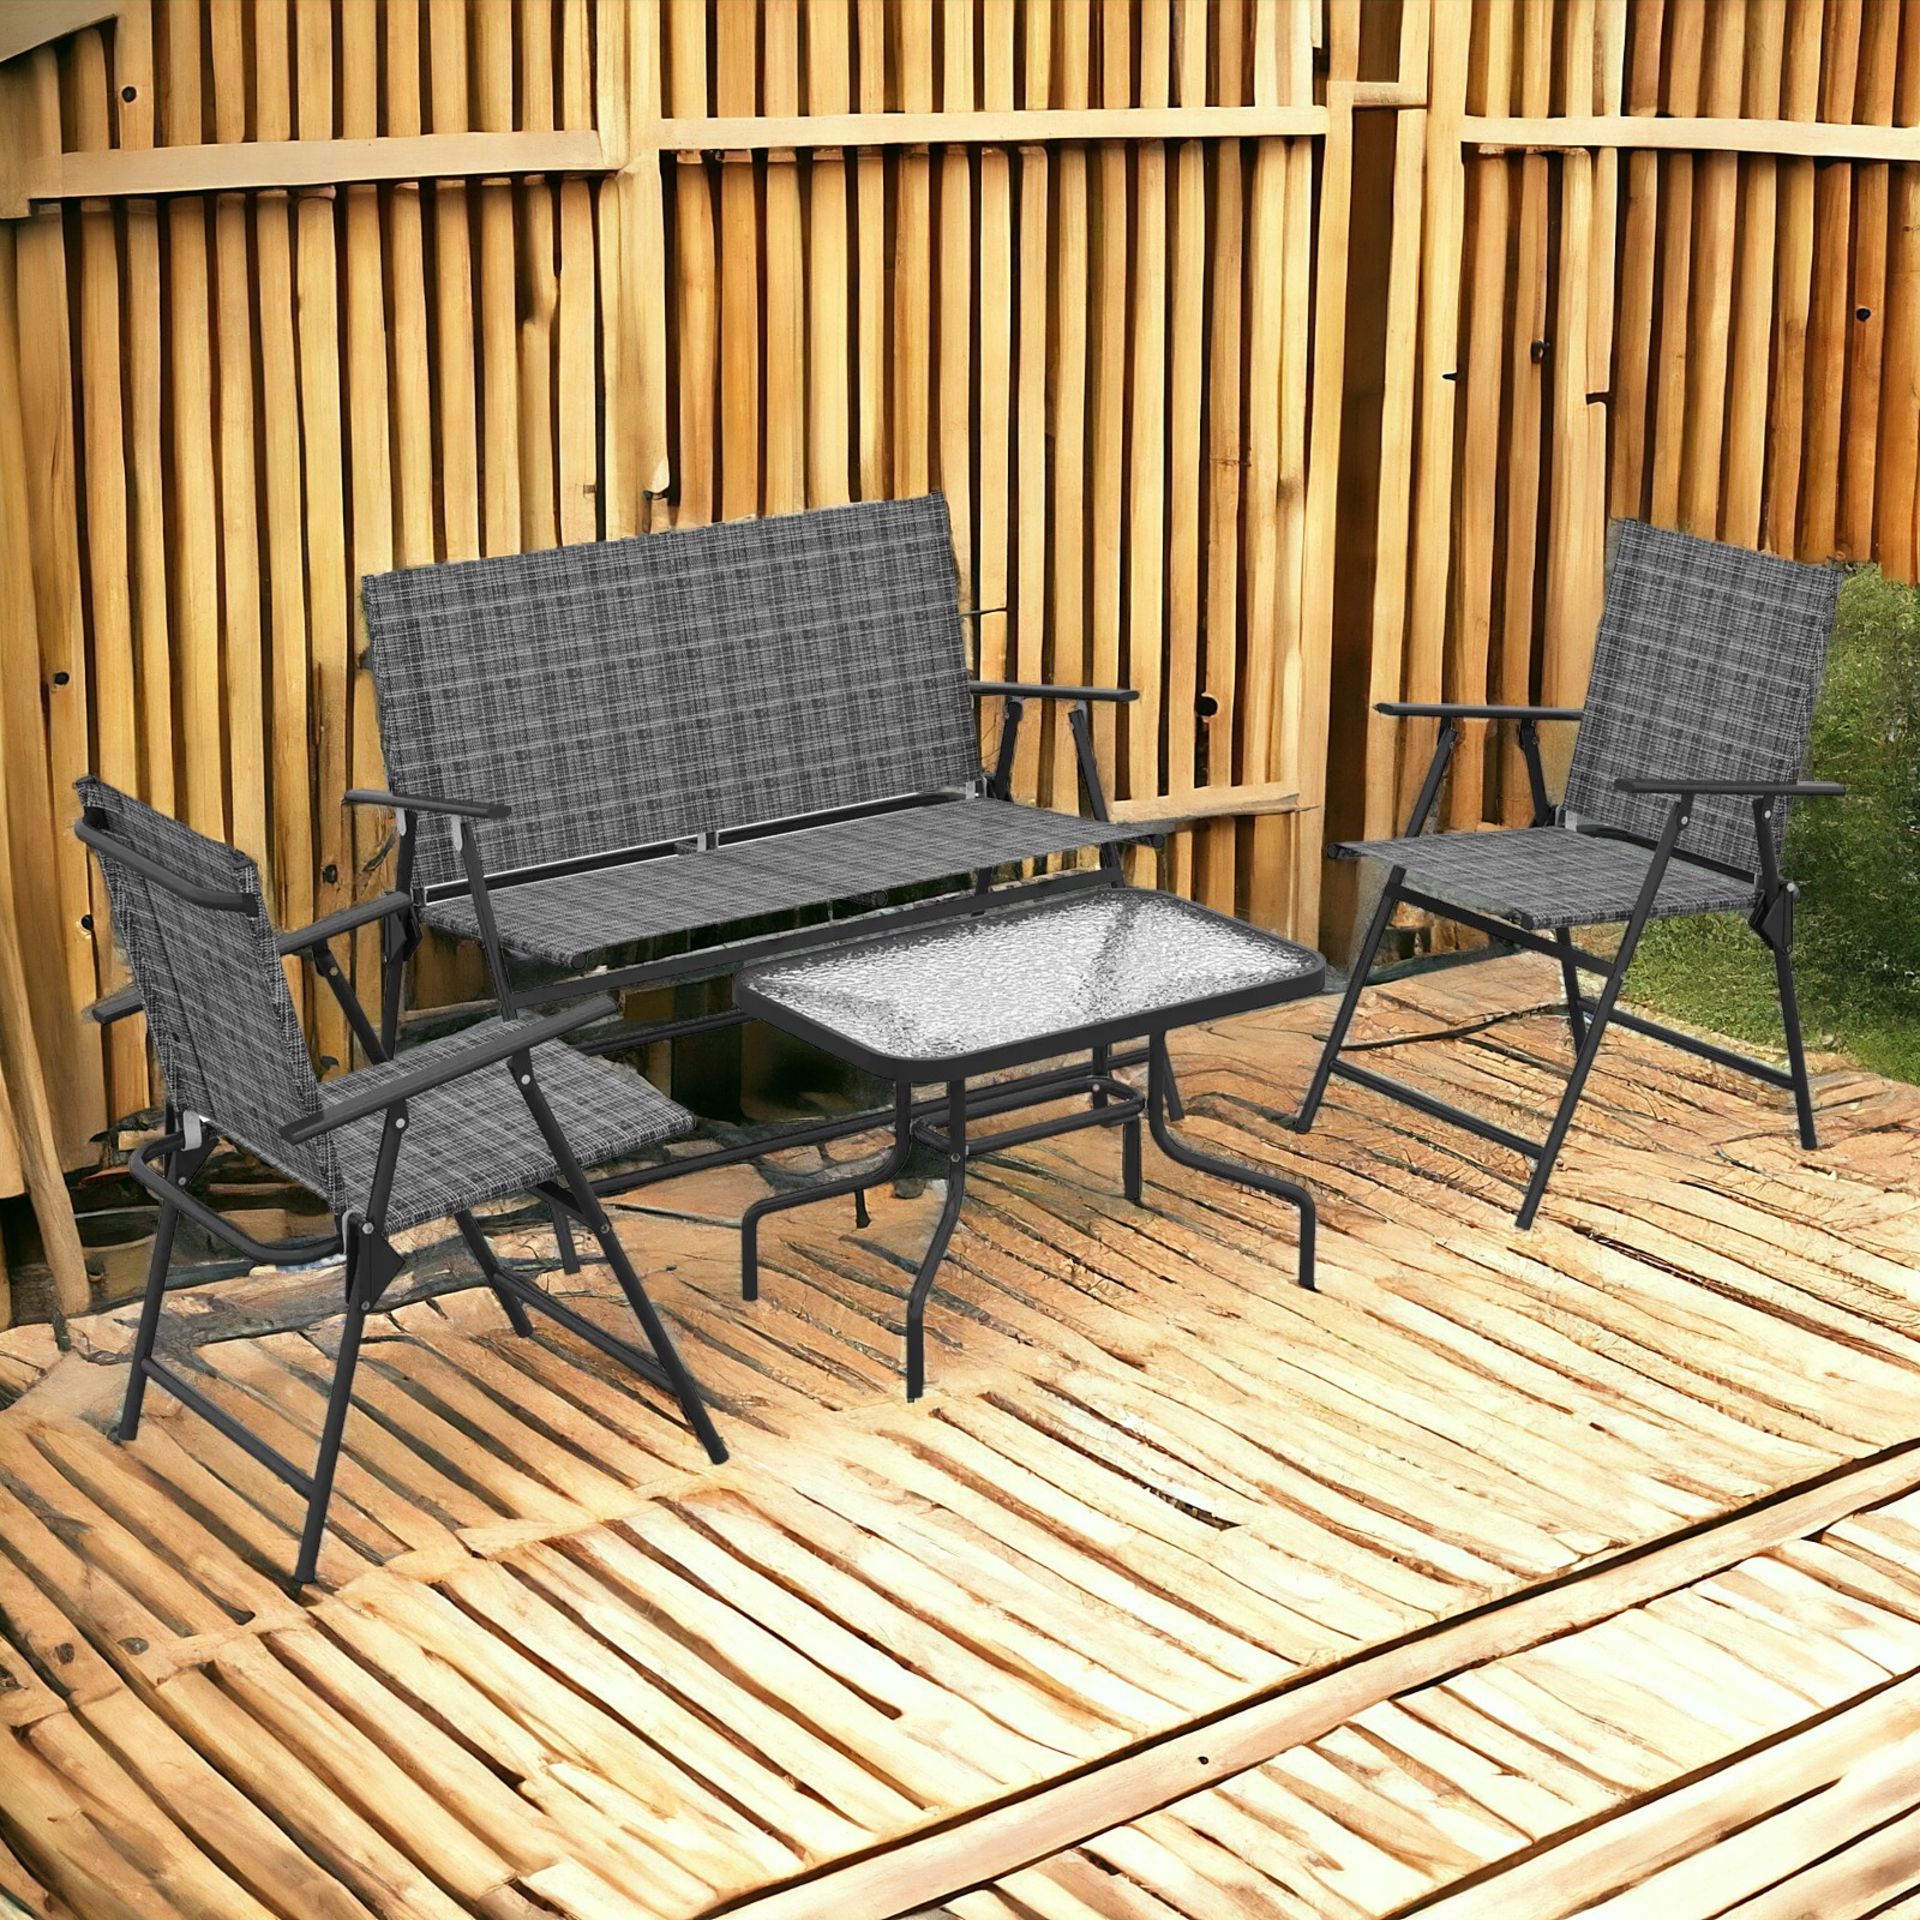 FREE DELIVERY - BRAND NEW PATIO FURNITURE SET, GARDEN SET W/ TABLE, FOLDABLE CHAIRS, A LOVESEAT